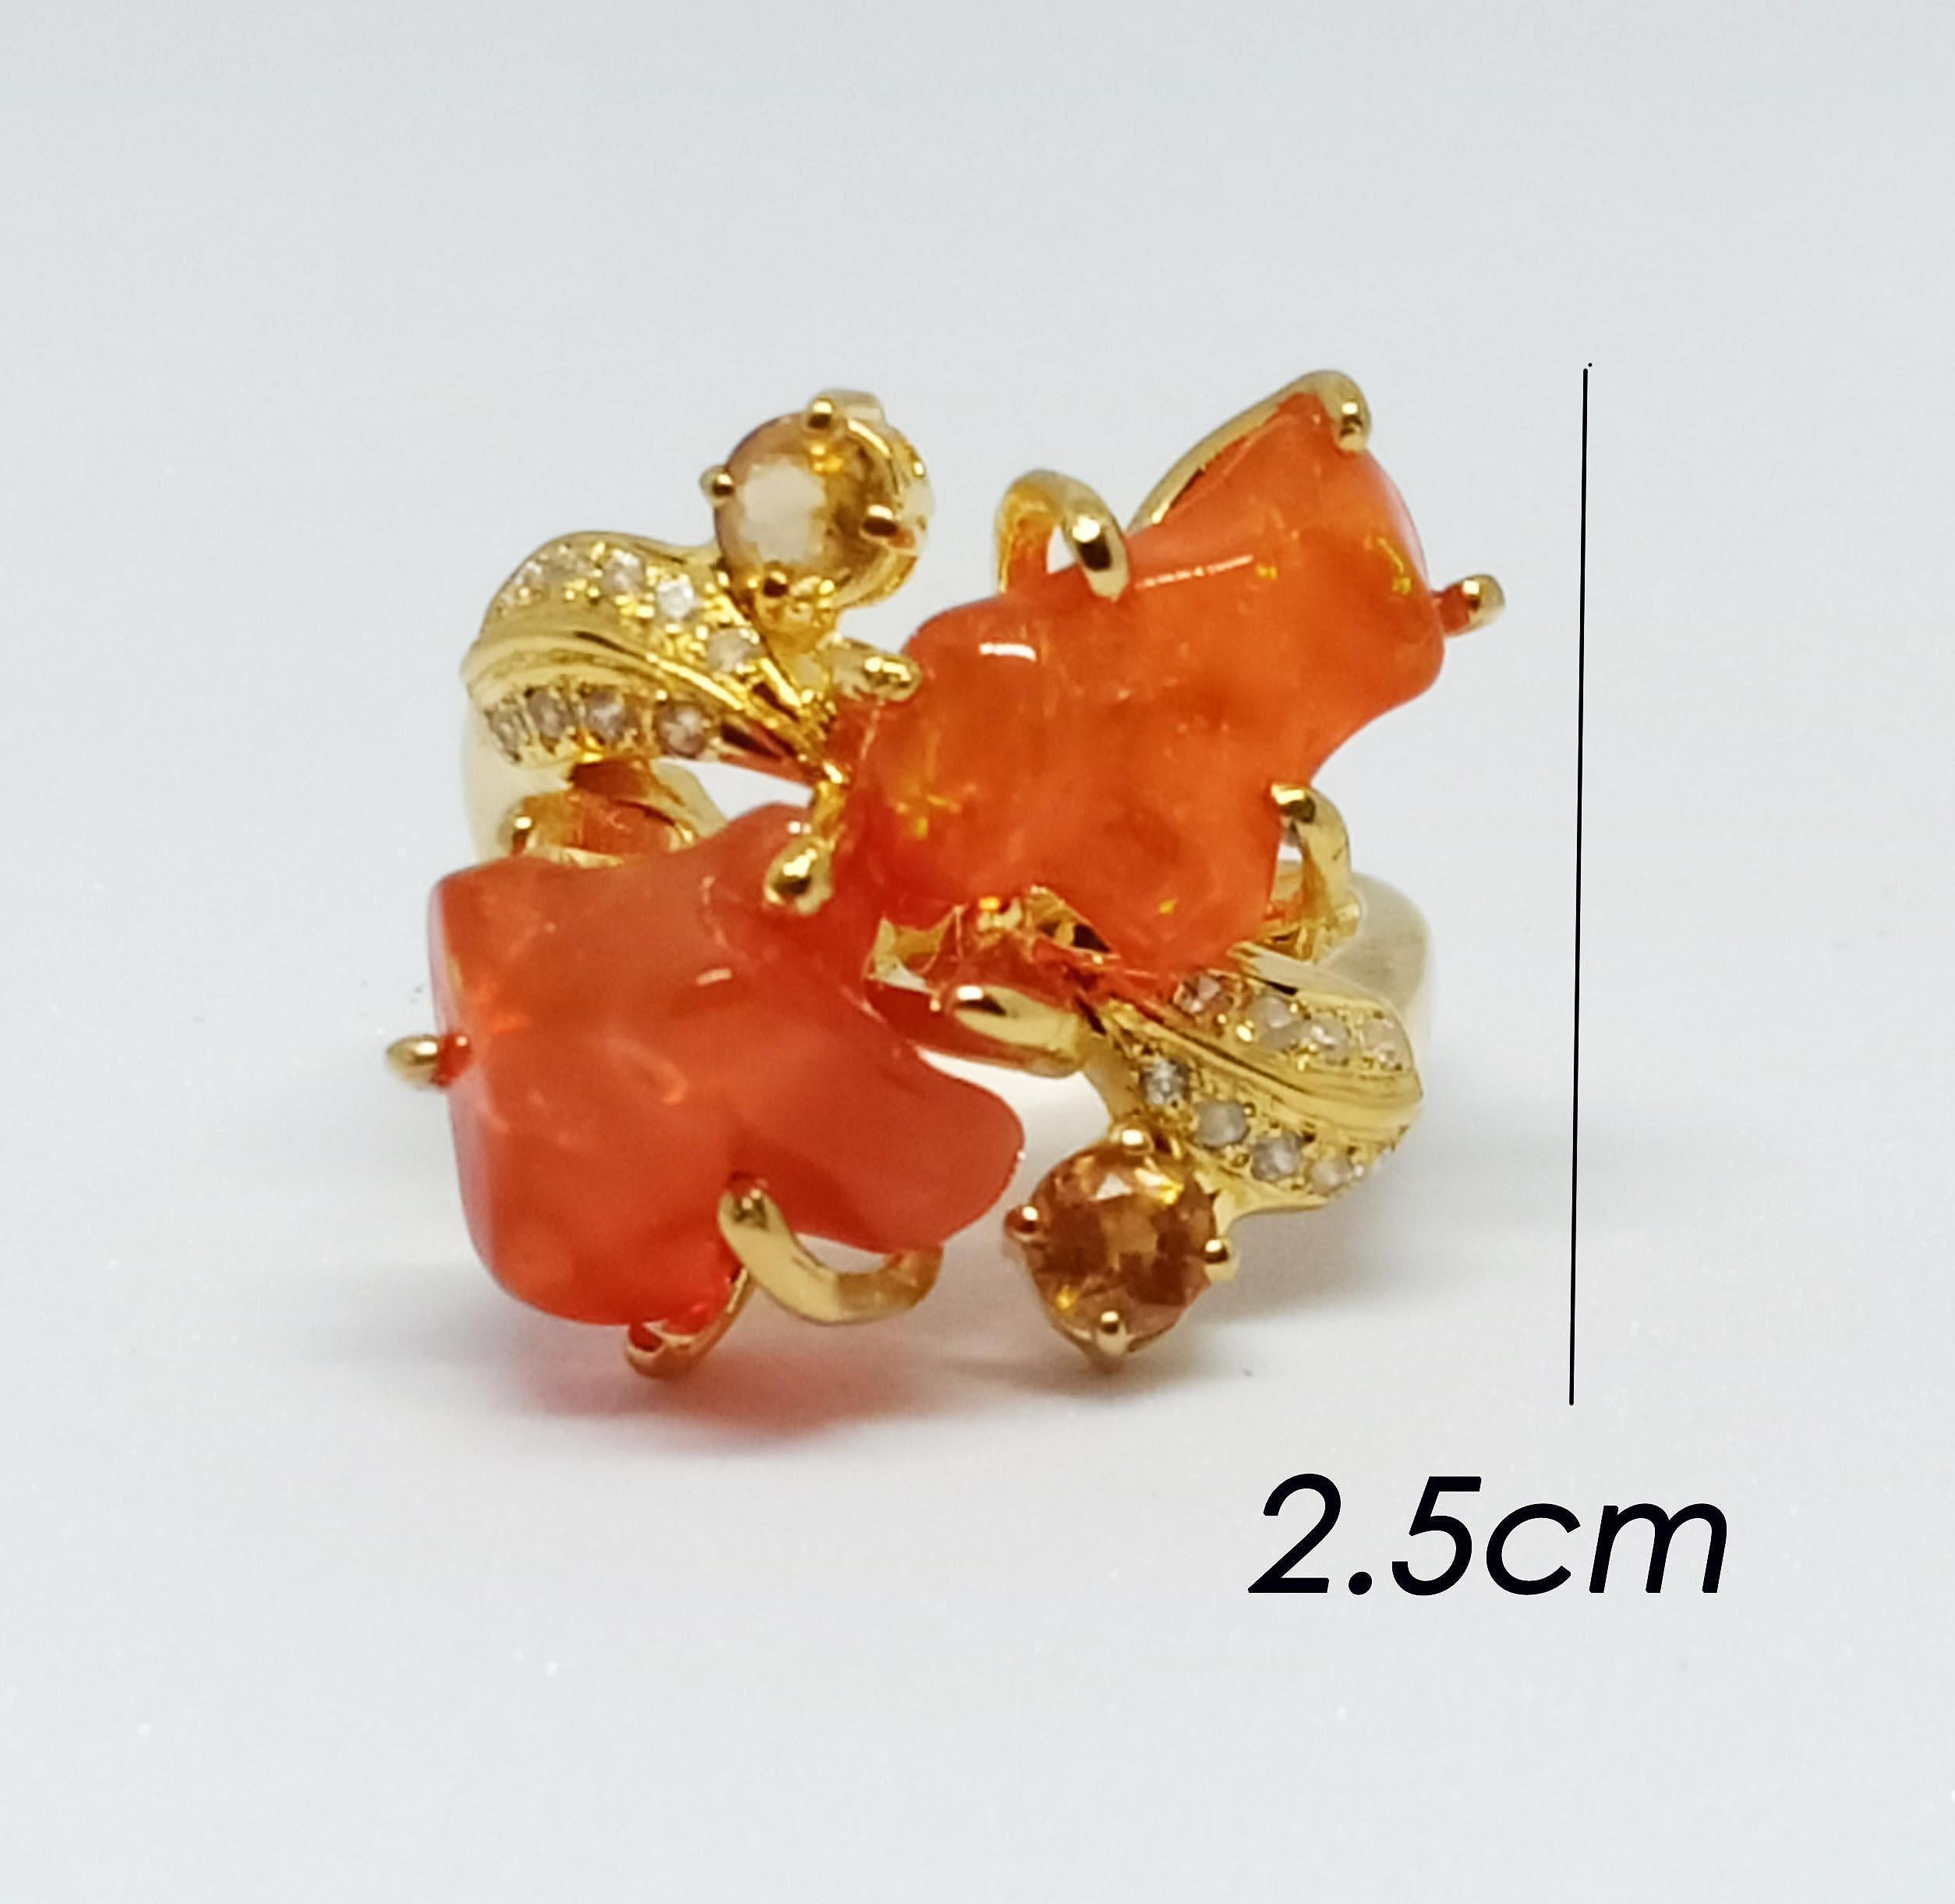 Orange Opal tumble (free form shape) 6.25 cts 2 pcs.
Honey yellow zircon 3.0 mm 2 pcs.
White zircon 
18k gold plated over sterling silver 
size 7 us.

Storefront (search) ornamento jewellery